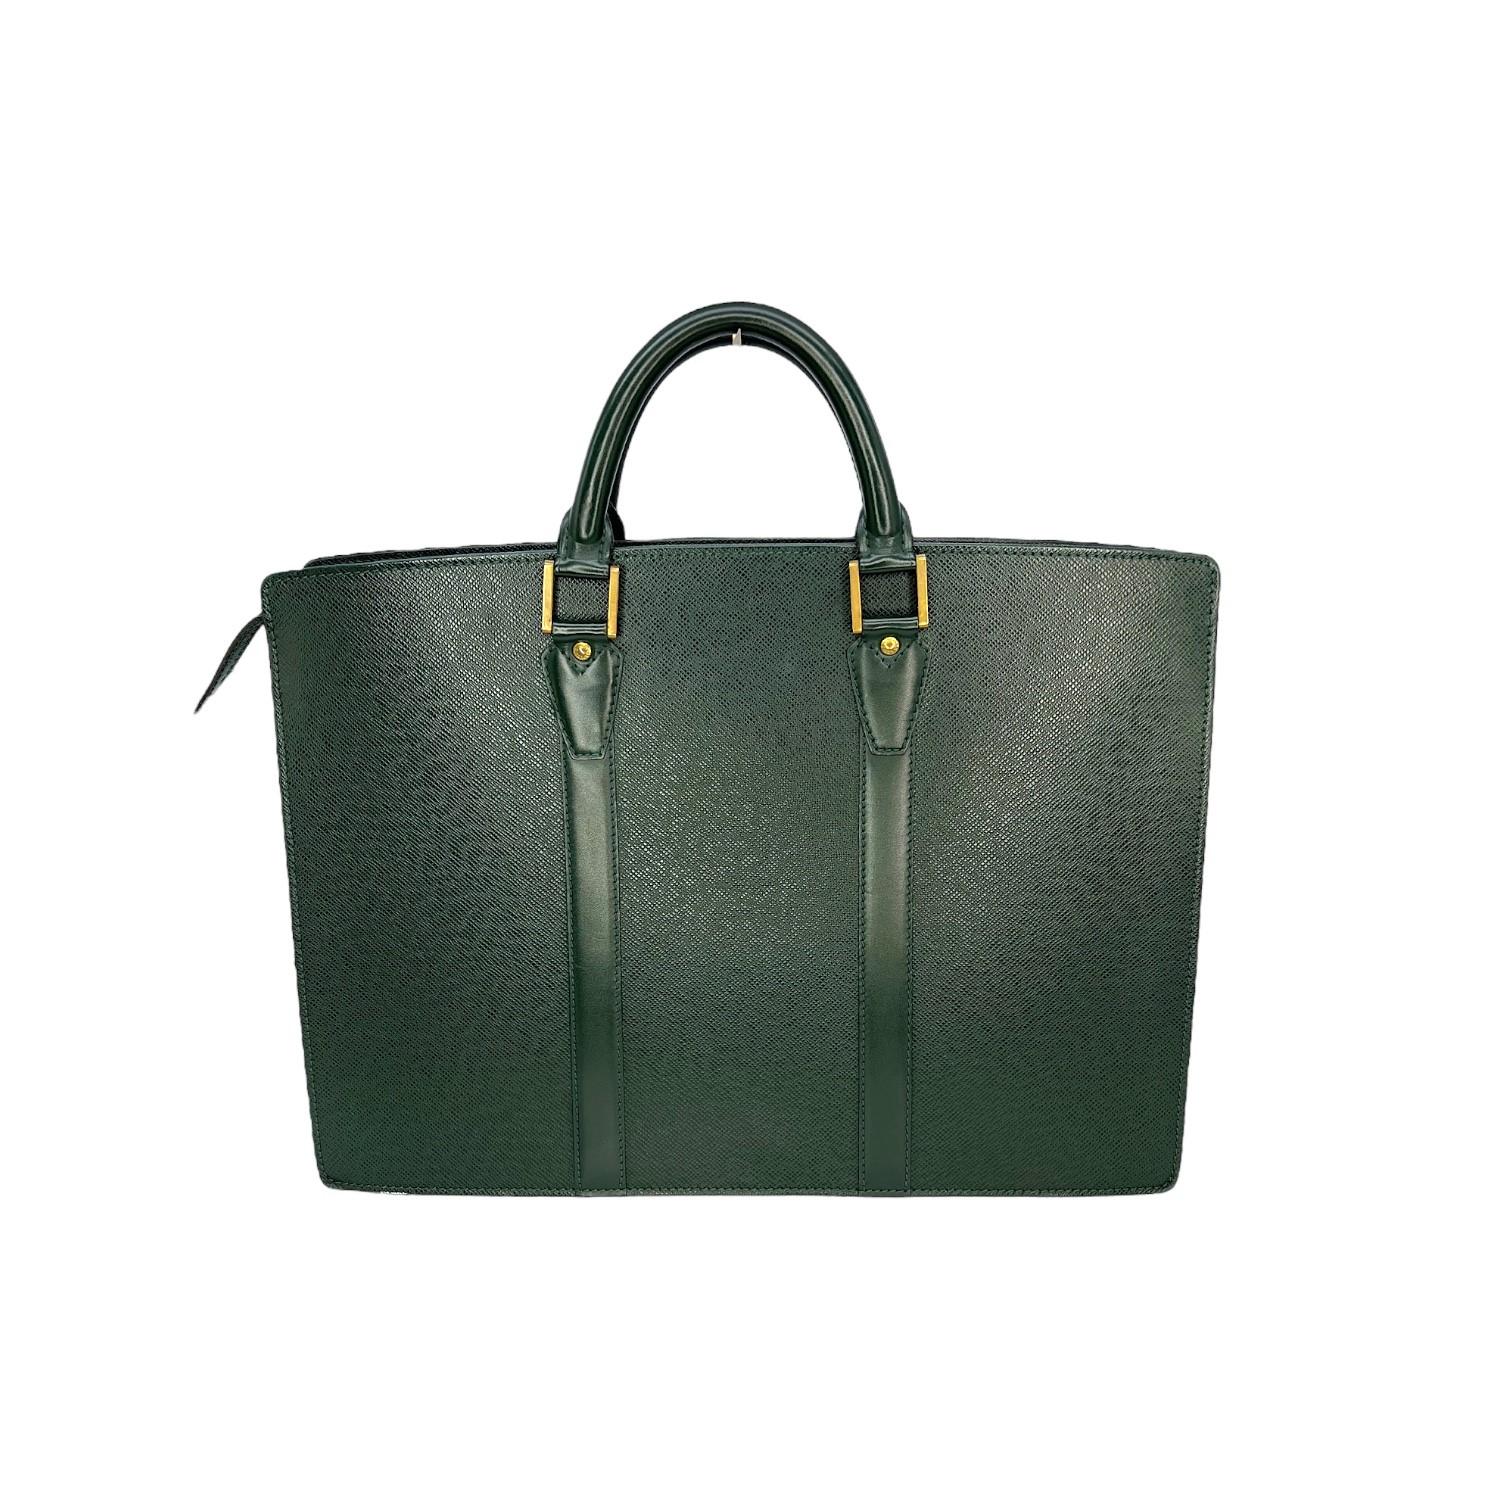 This Louis Vuitton Taiga Portfolio Briefcase is finely crafted of the green Louis Vuitton Taiga leather exterior with leather trimming and gold-tone hardware features. It has dual rolled leather top handles. It features twin slip pockets on the